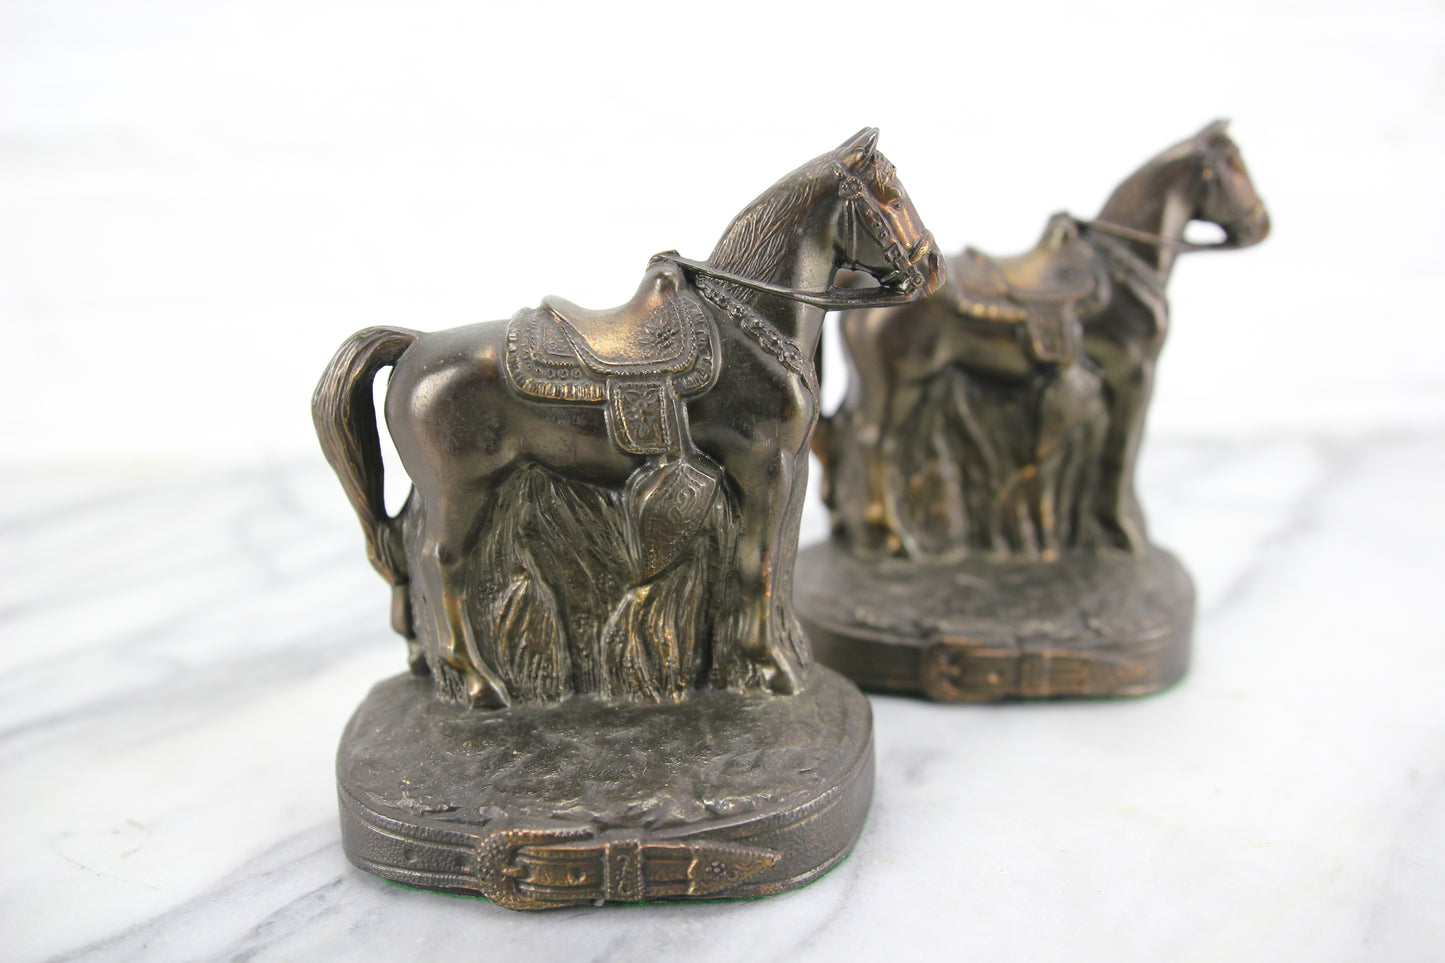 Bronzed Metal Standing Saddled Horse Bookends, Pair